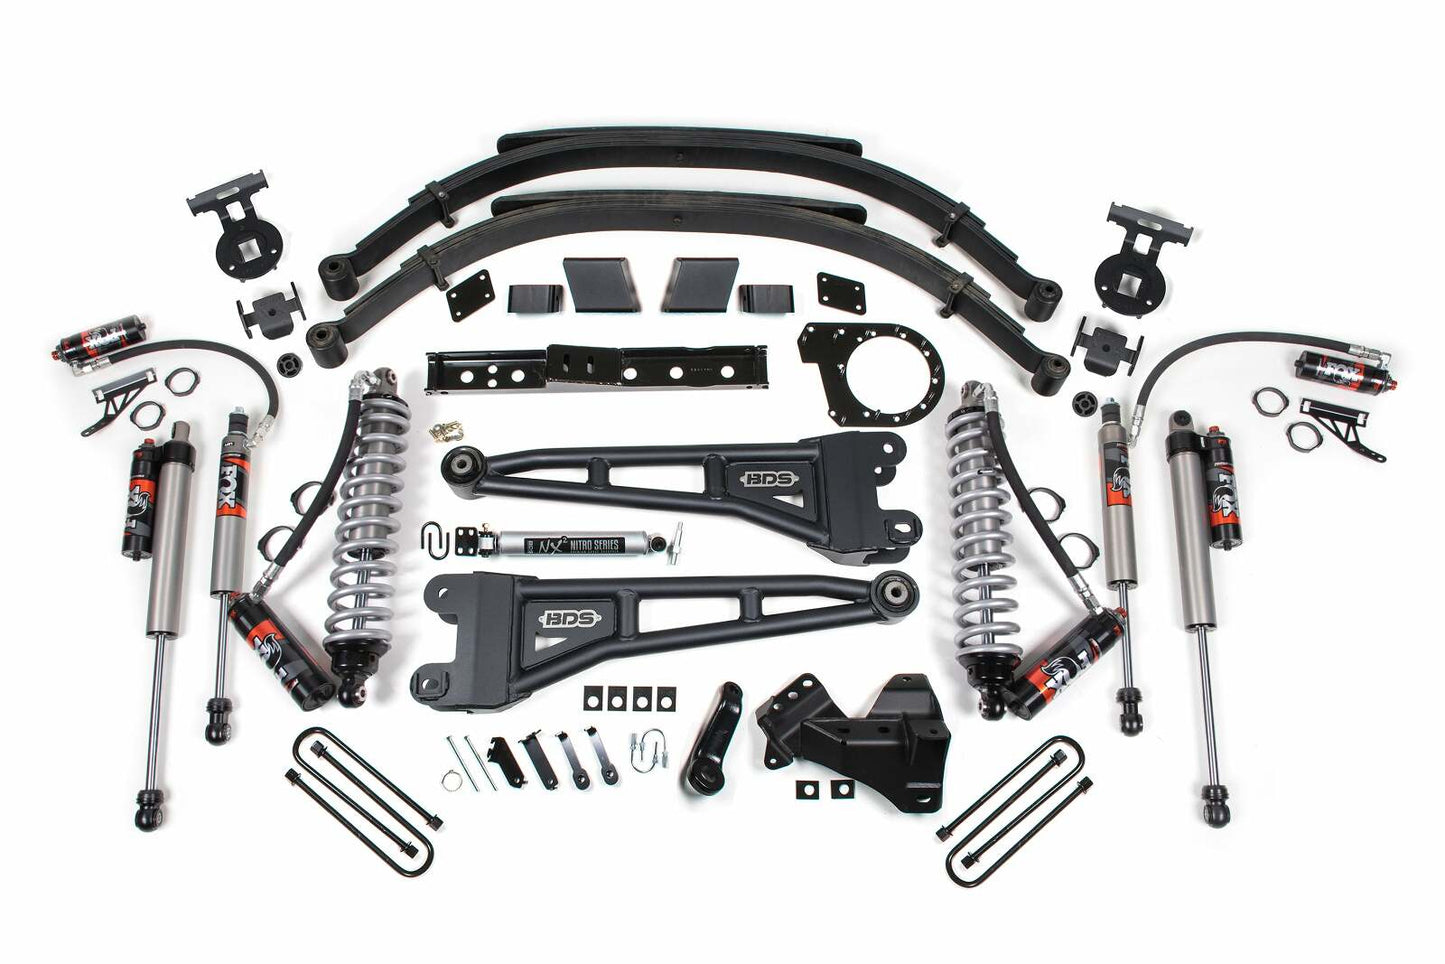 2020-2022 Ford F250/F350 4wd 7" Radius Arm Suspension Lift Kit, 5" Rear, Block, Diesel - Fox 2.5 PES C/O Front, Fox 2.0 IFP PS Aux Front, Fox 2.0 IFP PS Rear